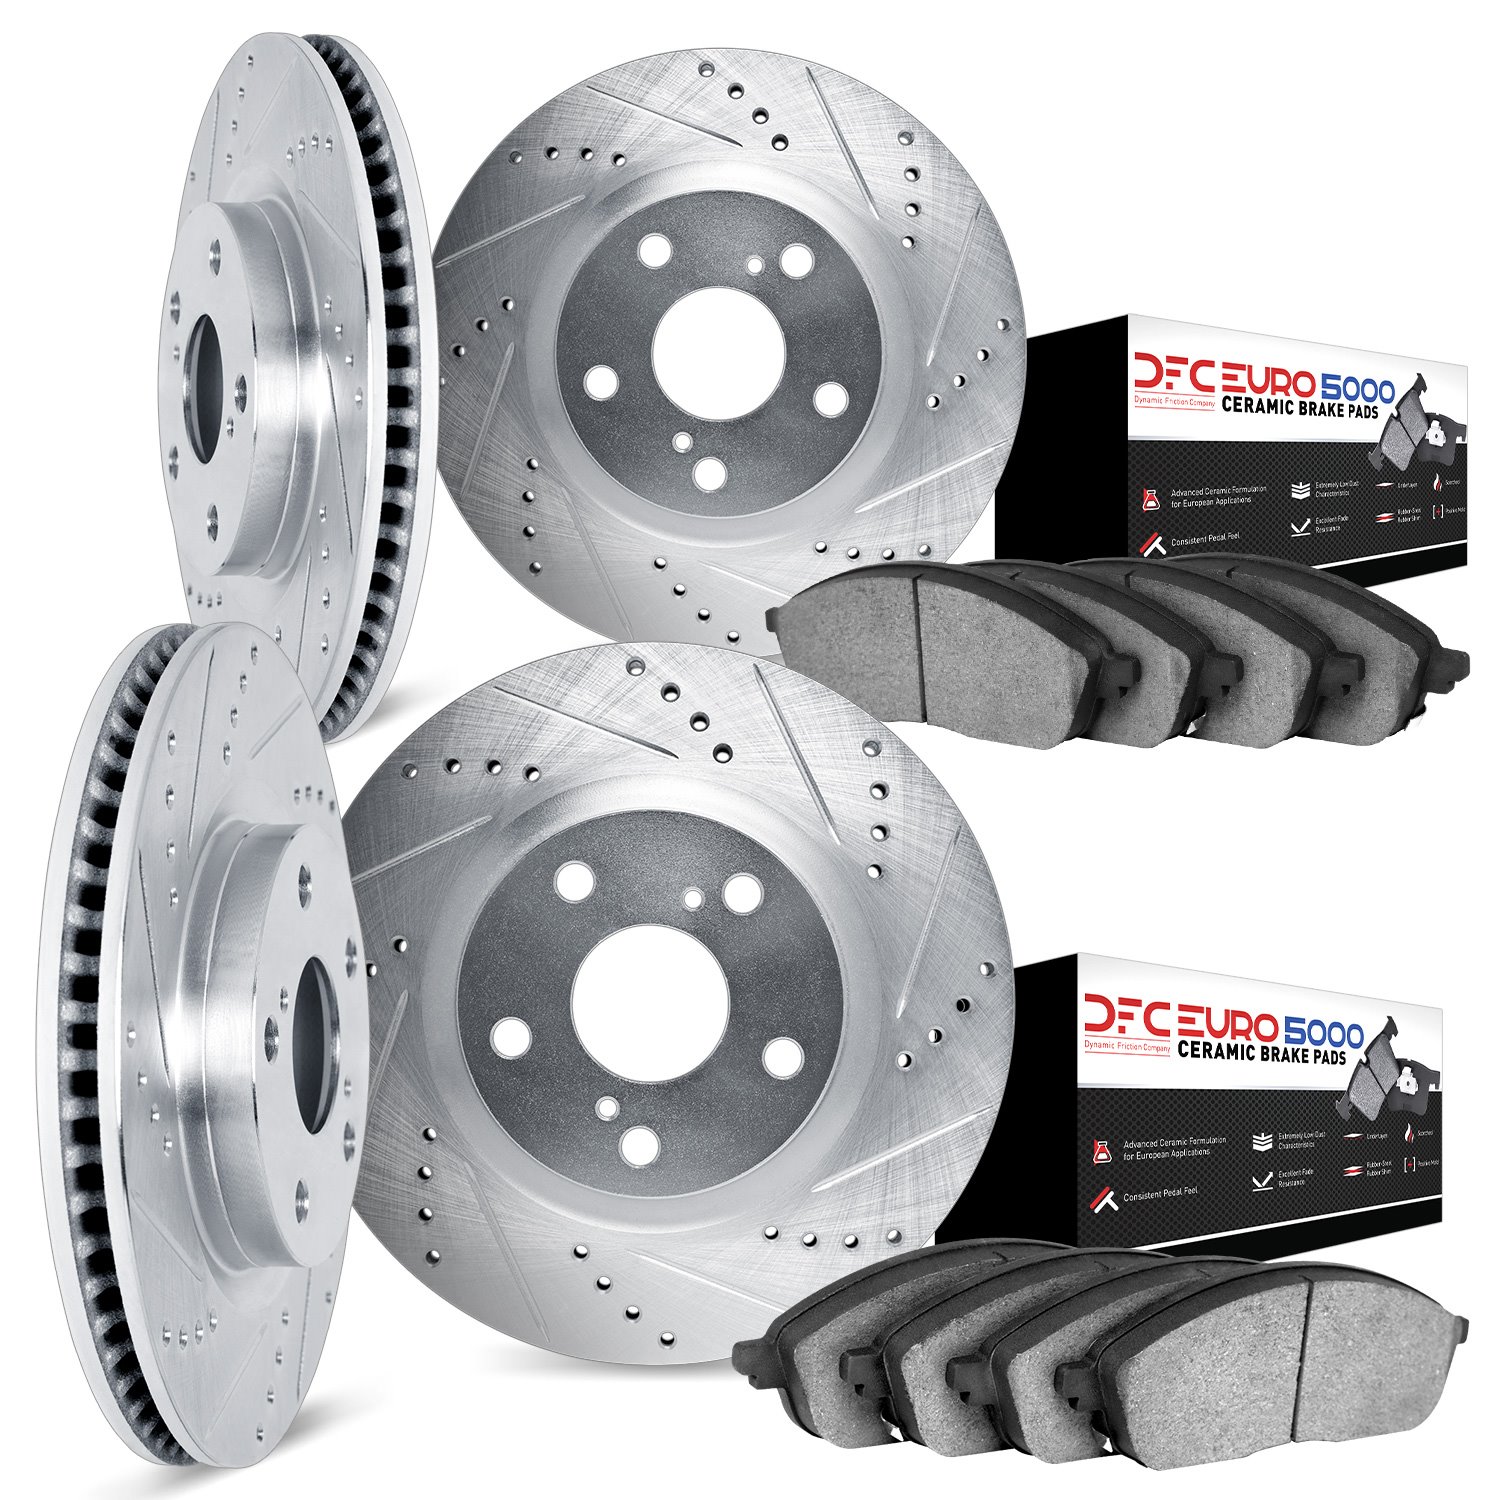 7604-54001 Drilled/Slotted Brake Rotors w/5000 Euro Ceramic Brake Pads Kit [Silver], 2003-2005 Jaguar, Position: Front and Rear